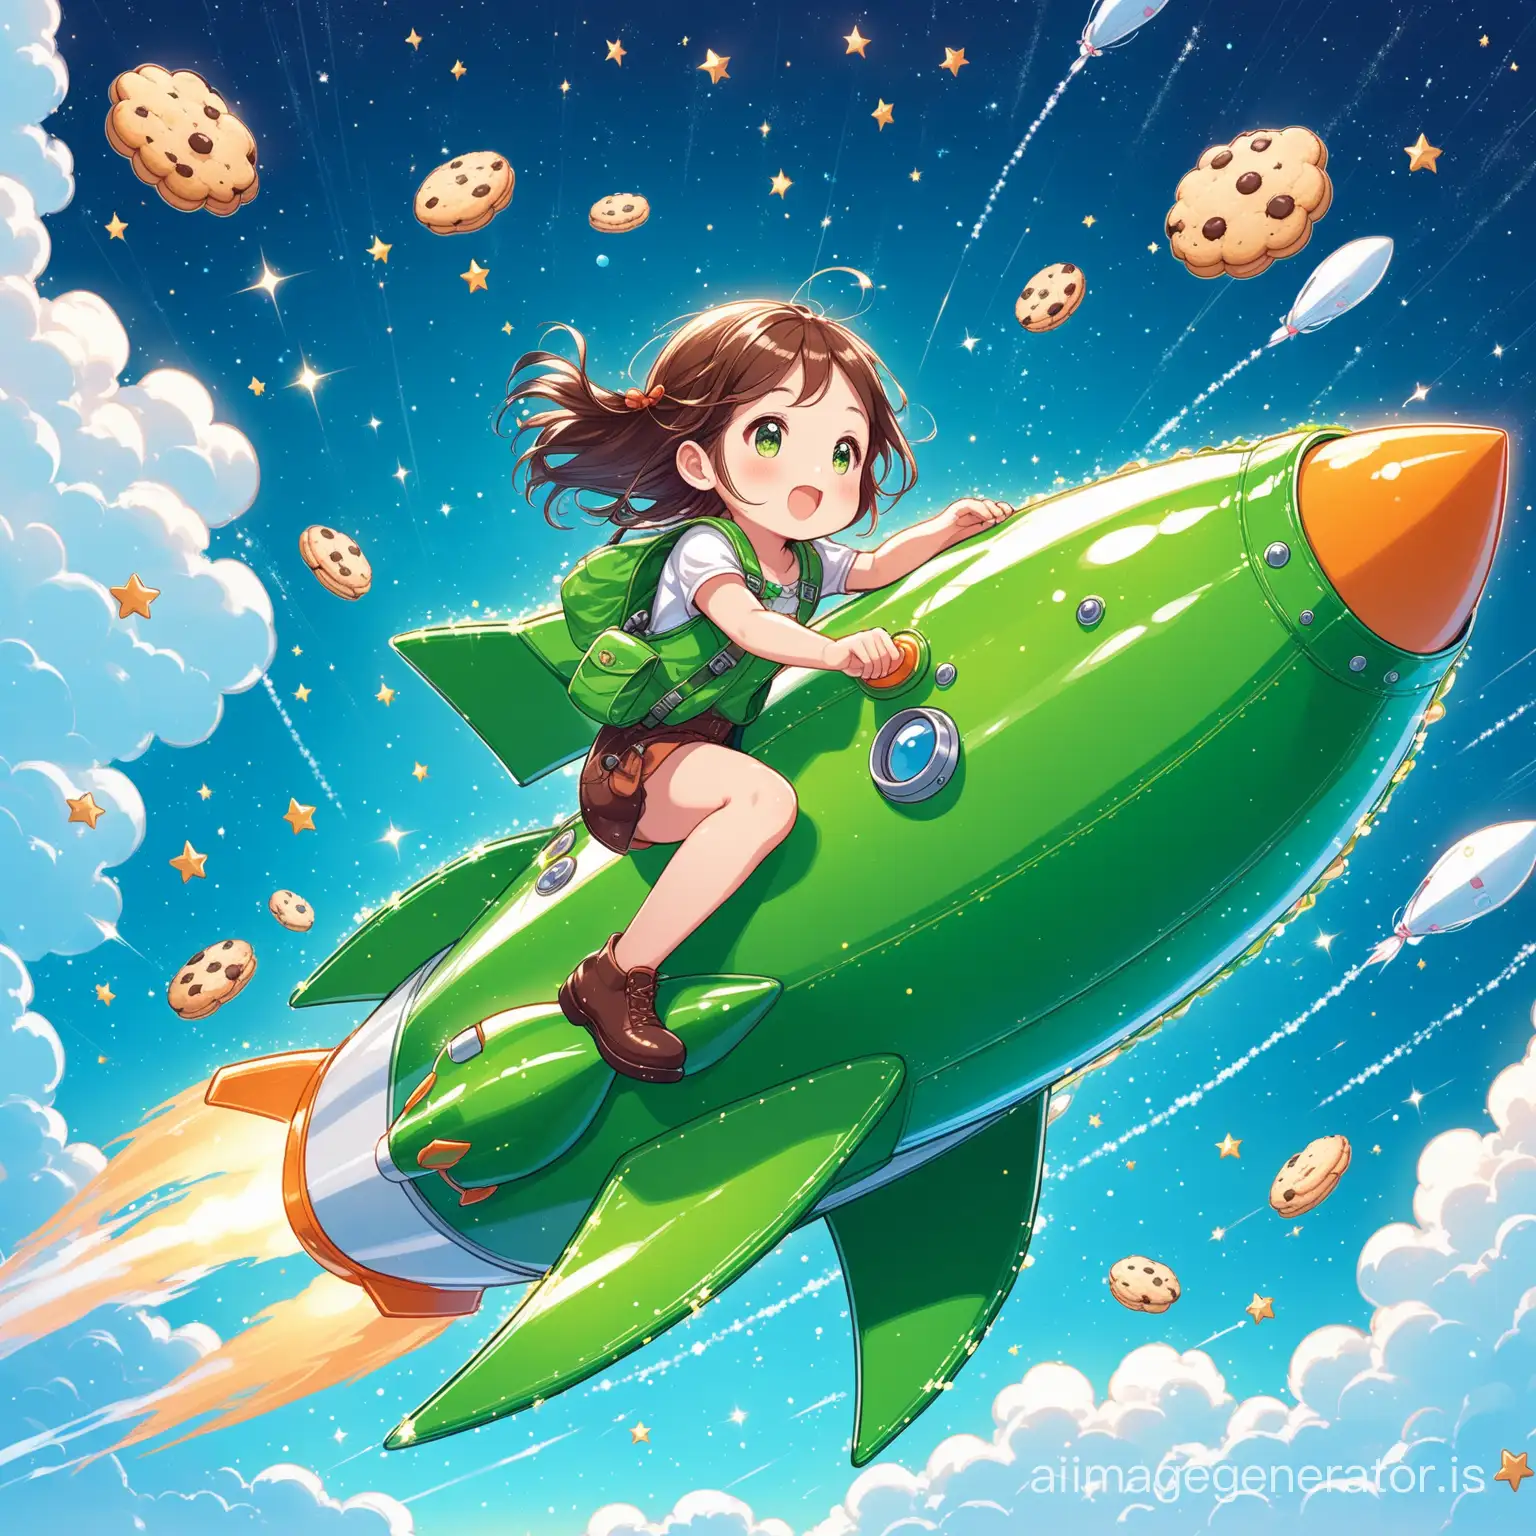 A cute girl riding a green rocket  with details flying in the sky.
We also see cookies  falling in the sky with details
Small bubbles are scattered in the sky with details
Details are evident beautifully and with great precision
